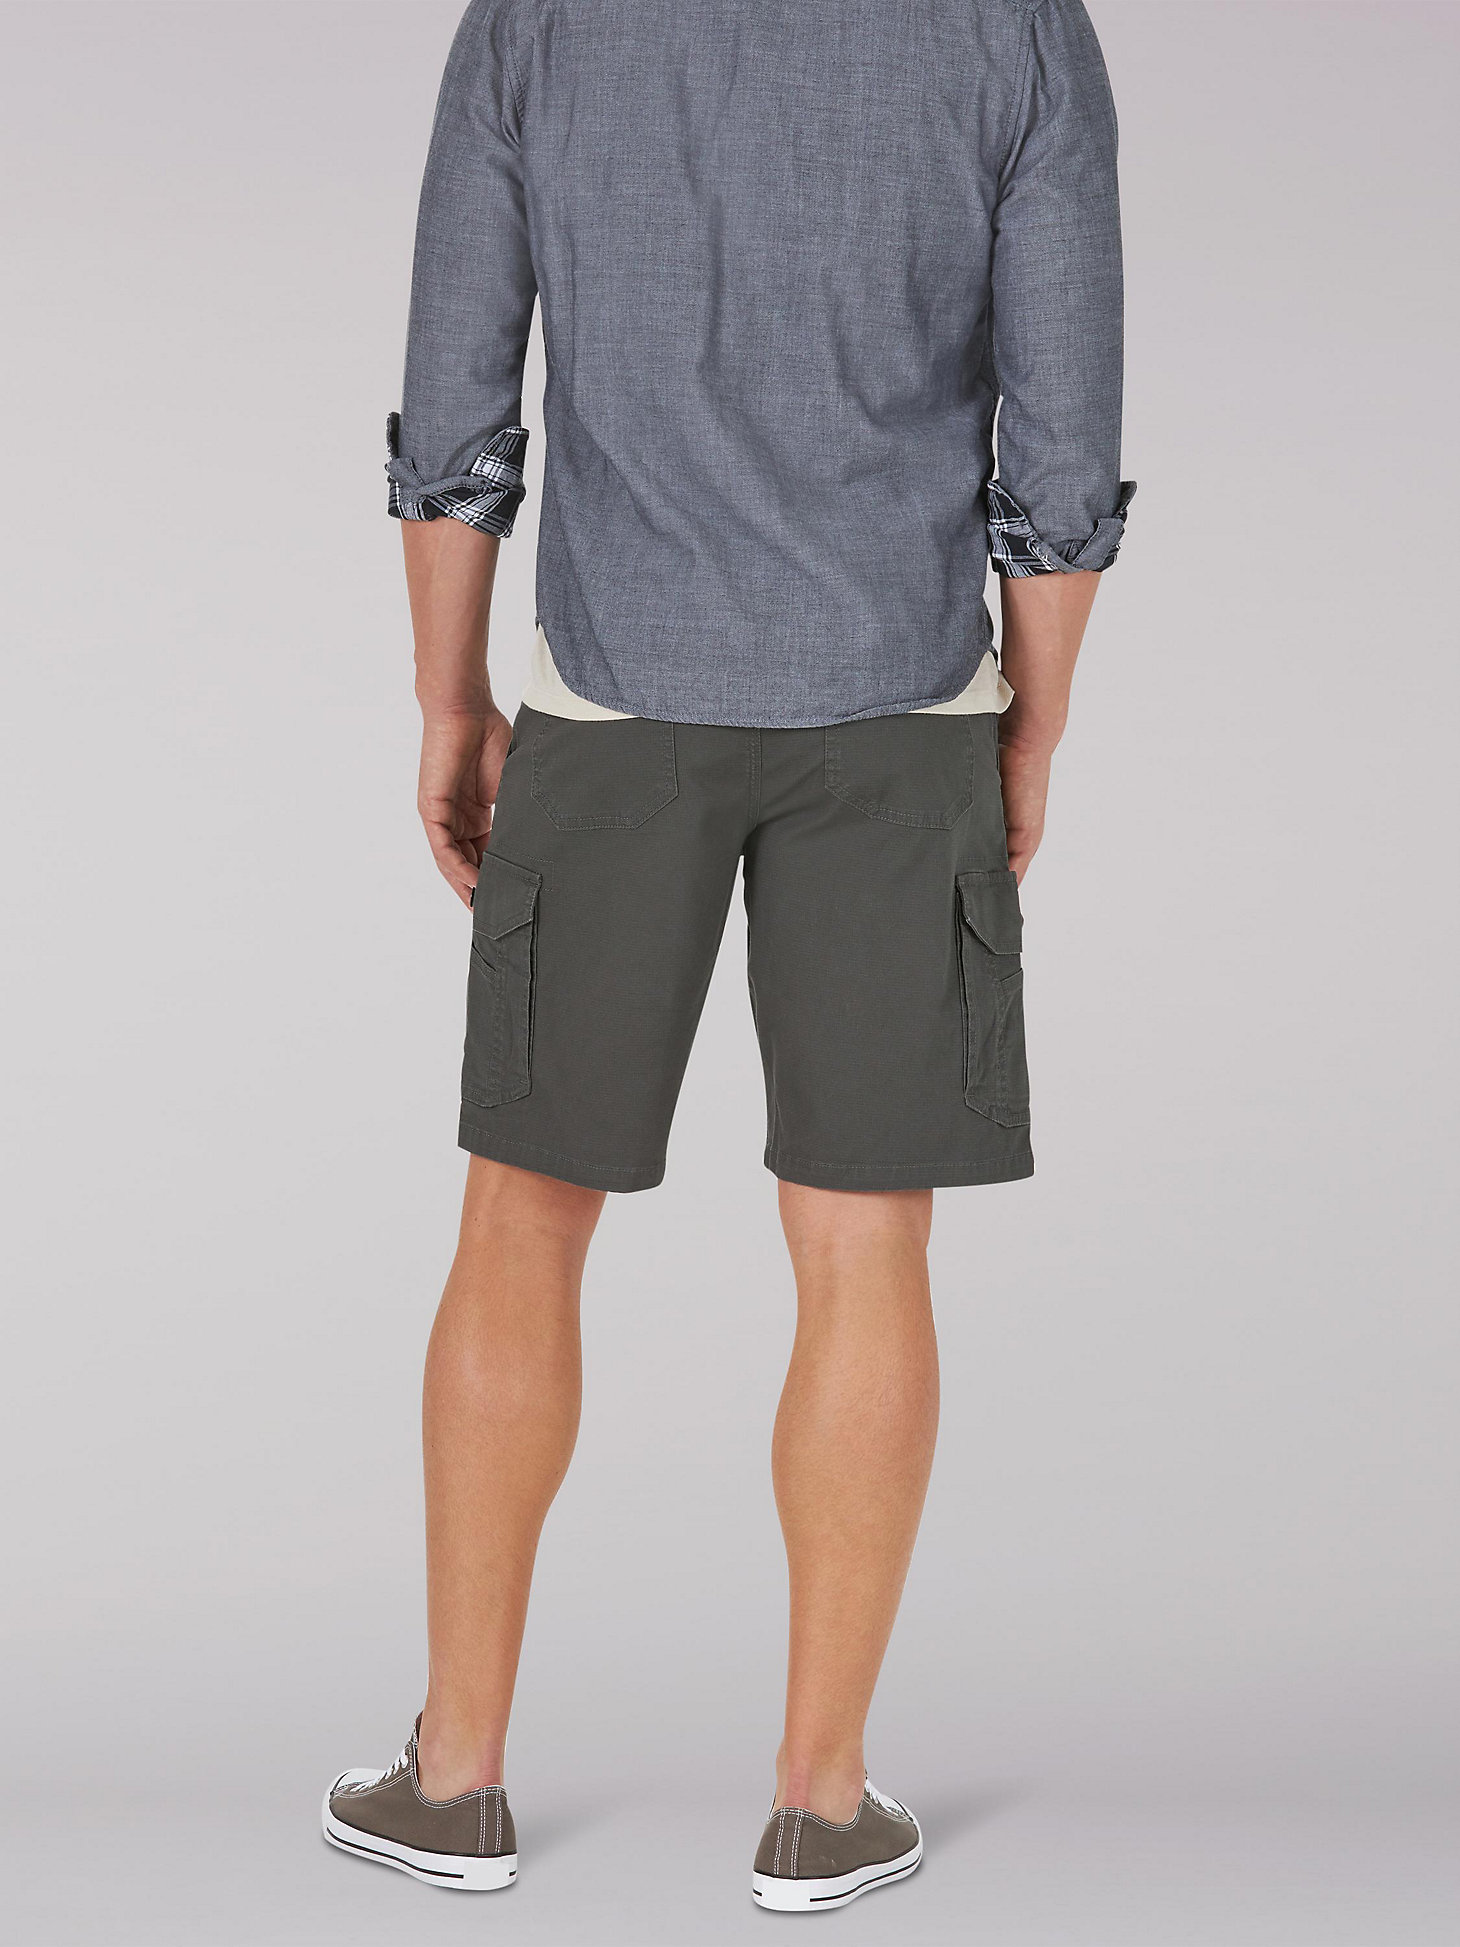 Men's Extreme Motion Swope Short in Engineer alternative view 1